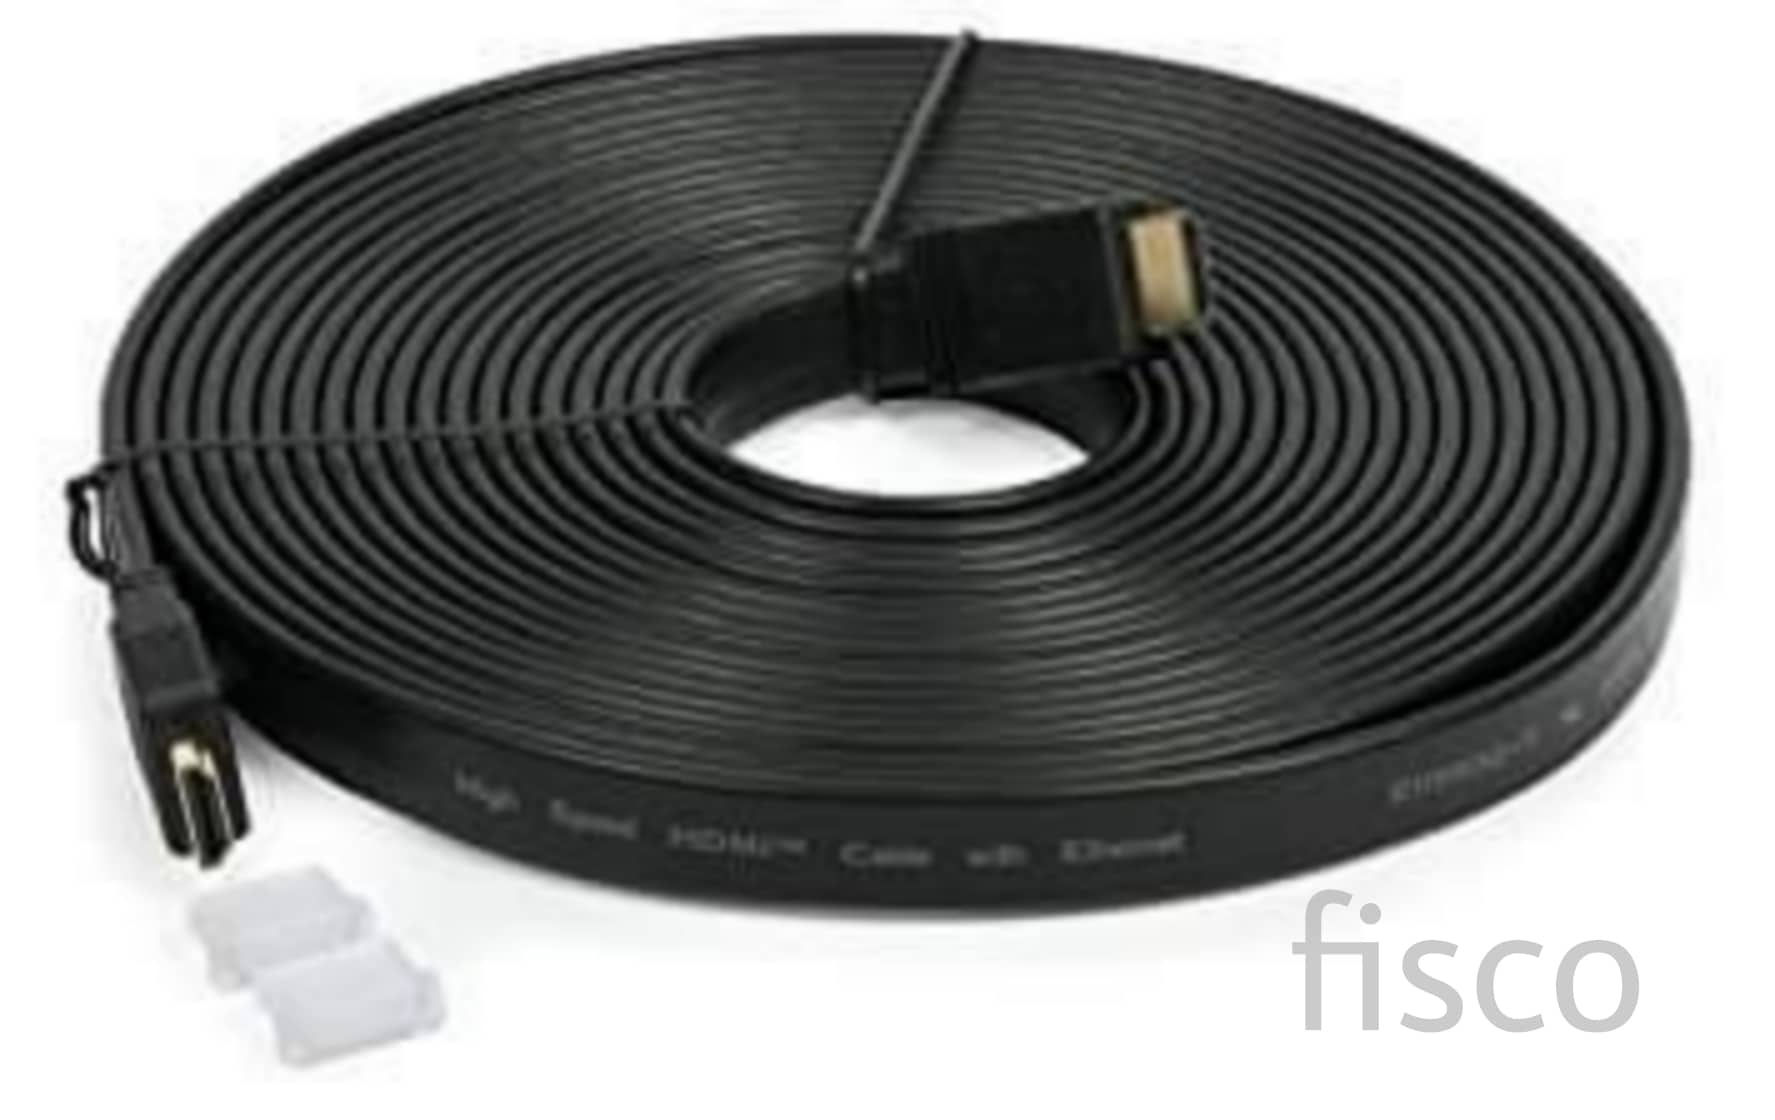 product.php?id=HDMI CABLE 15 METER